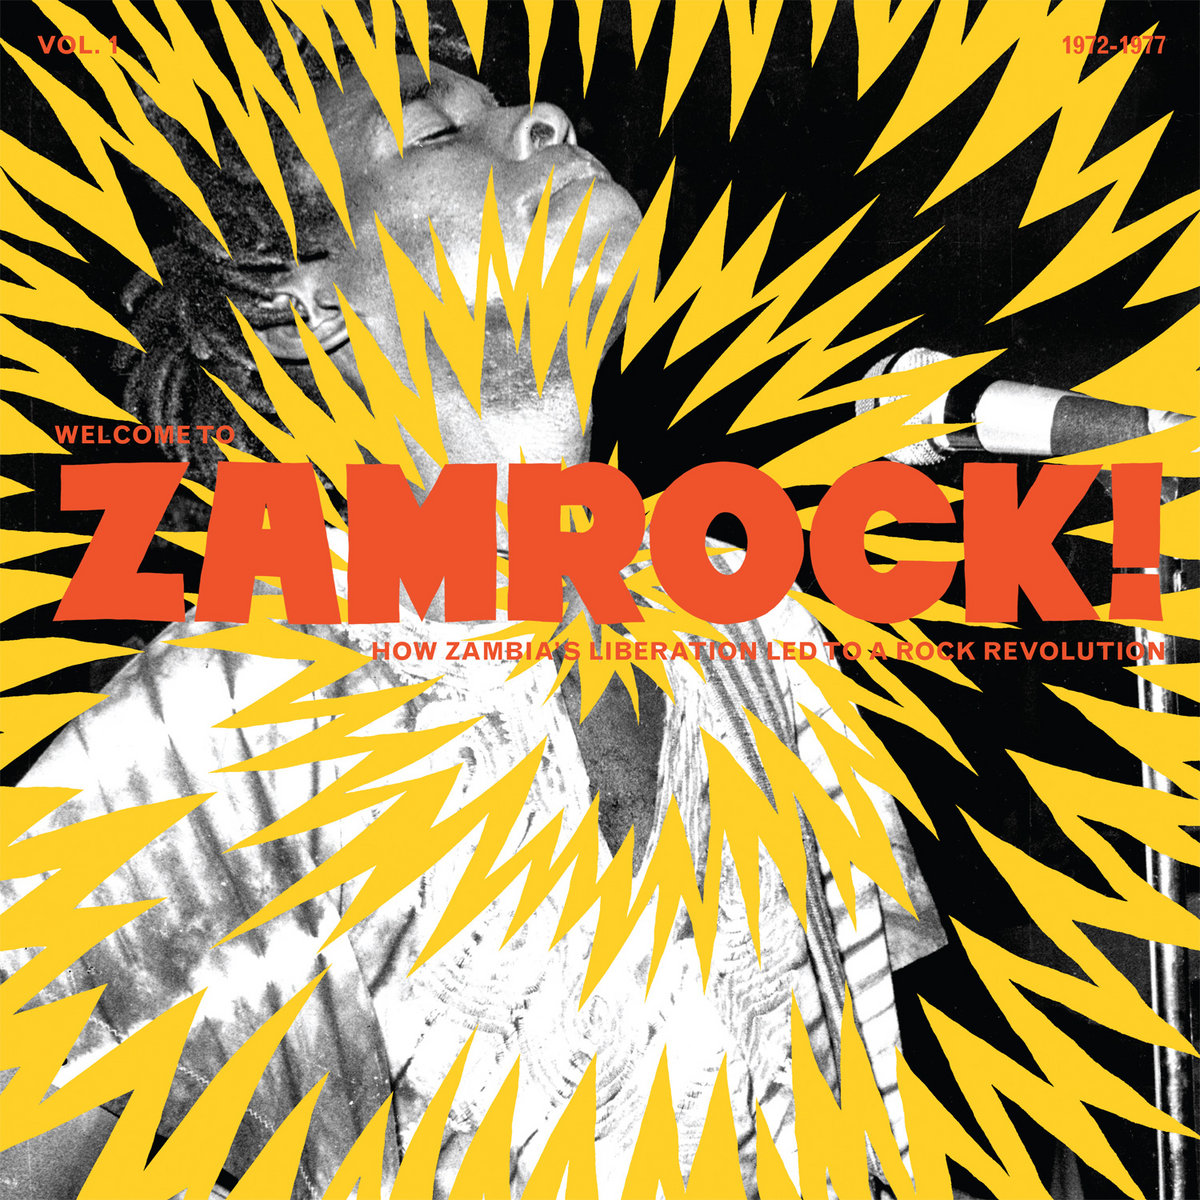 Album cover for Welcome To Zamrock! How Zambia​’​s Liberation Led To a Rock Revolution, Vol. 1 (1972​-​1977)